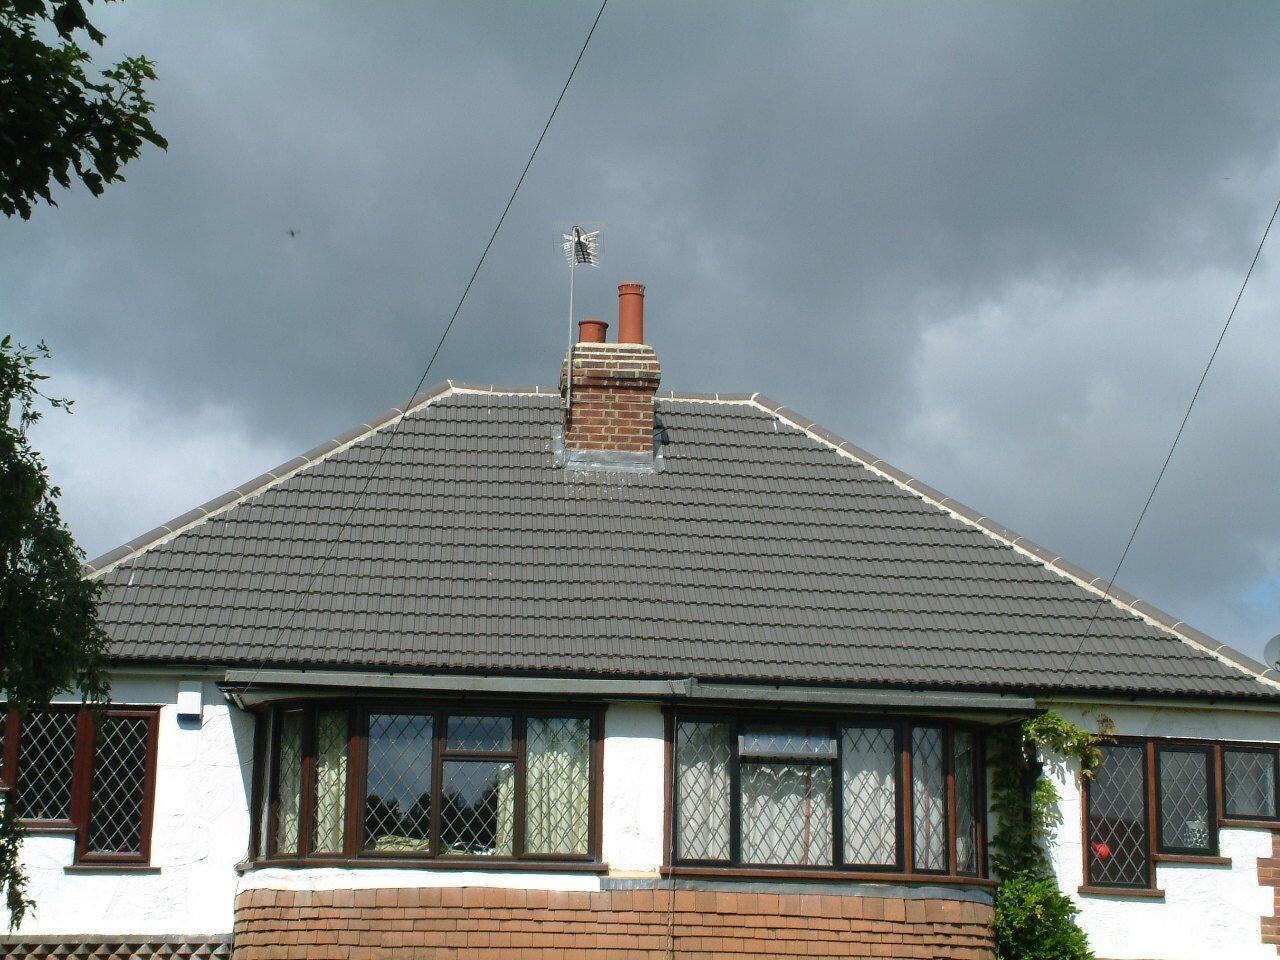 Images northkentroofing.co.uk